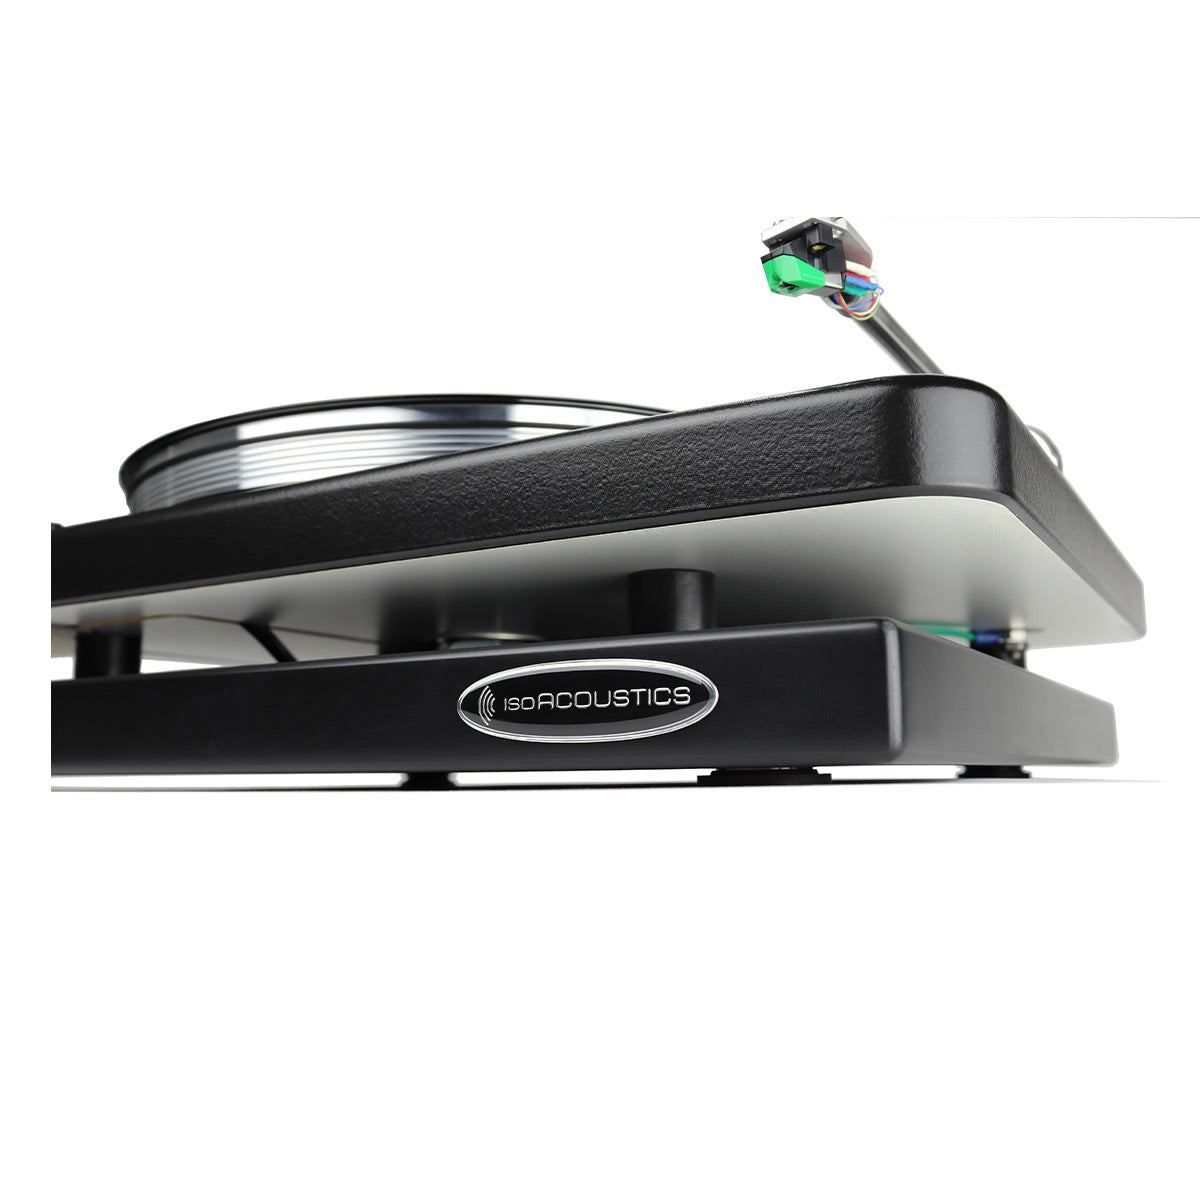 IsoAcoustics zaZen I Stable Isolation Platform for Turntables to Reduce Vibration & Skipping (Max 25 lbs)